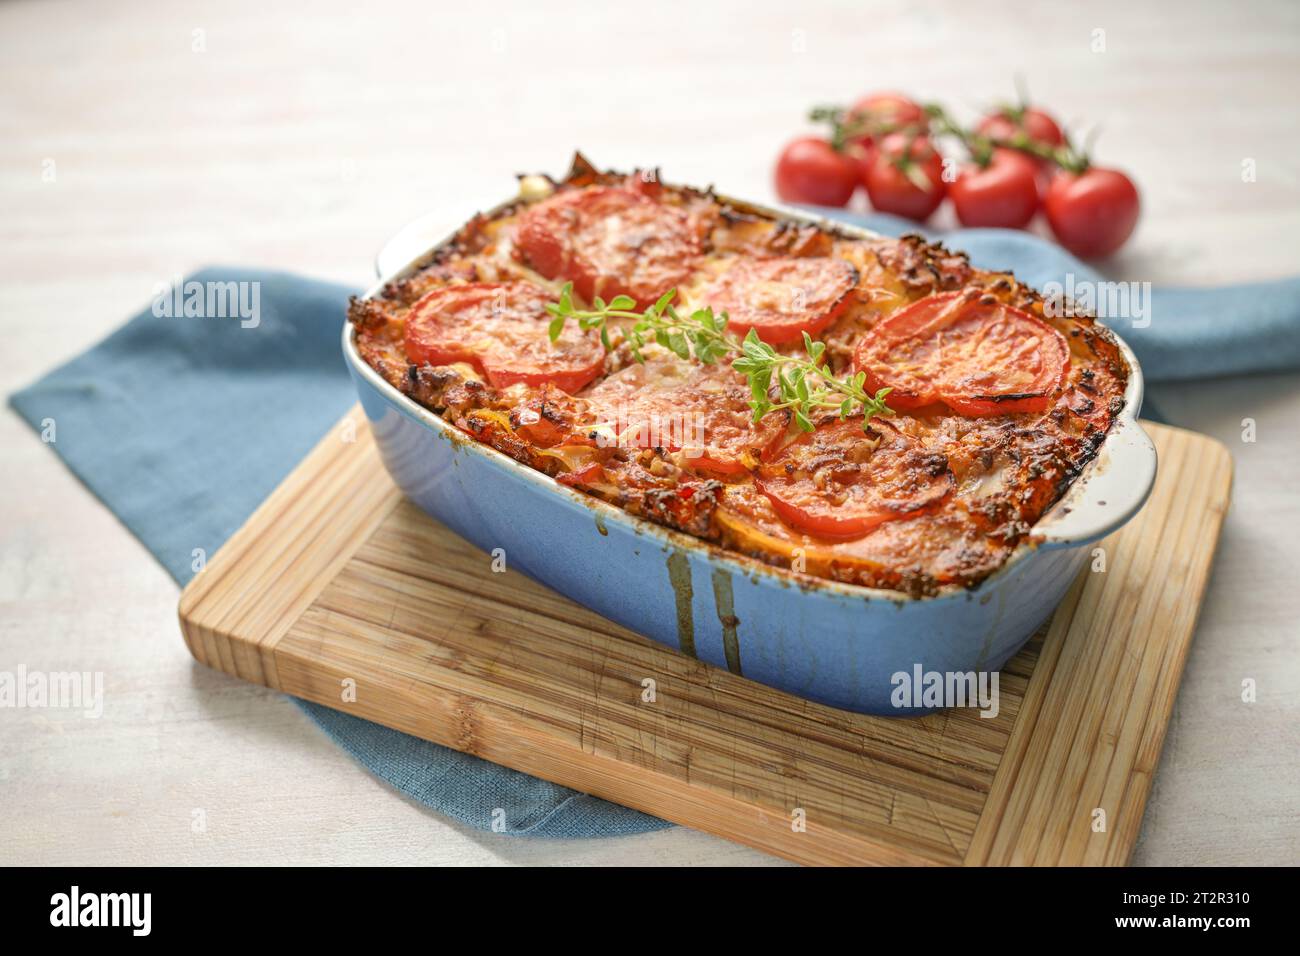 Lasagna, fresh from the oven, casserole dish of flat pasta sheets, ground beef sauce, vegetables and tomatoes, topped with melted cheese on a wooden k Stock Photo